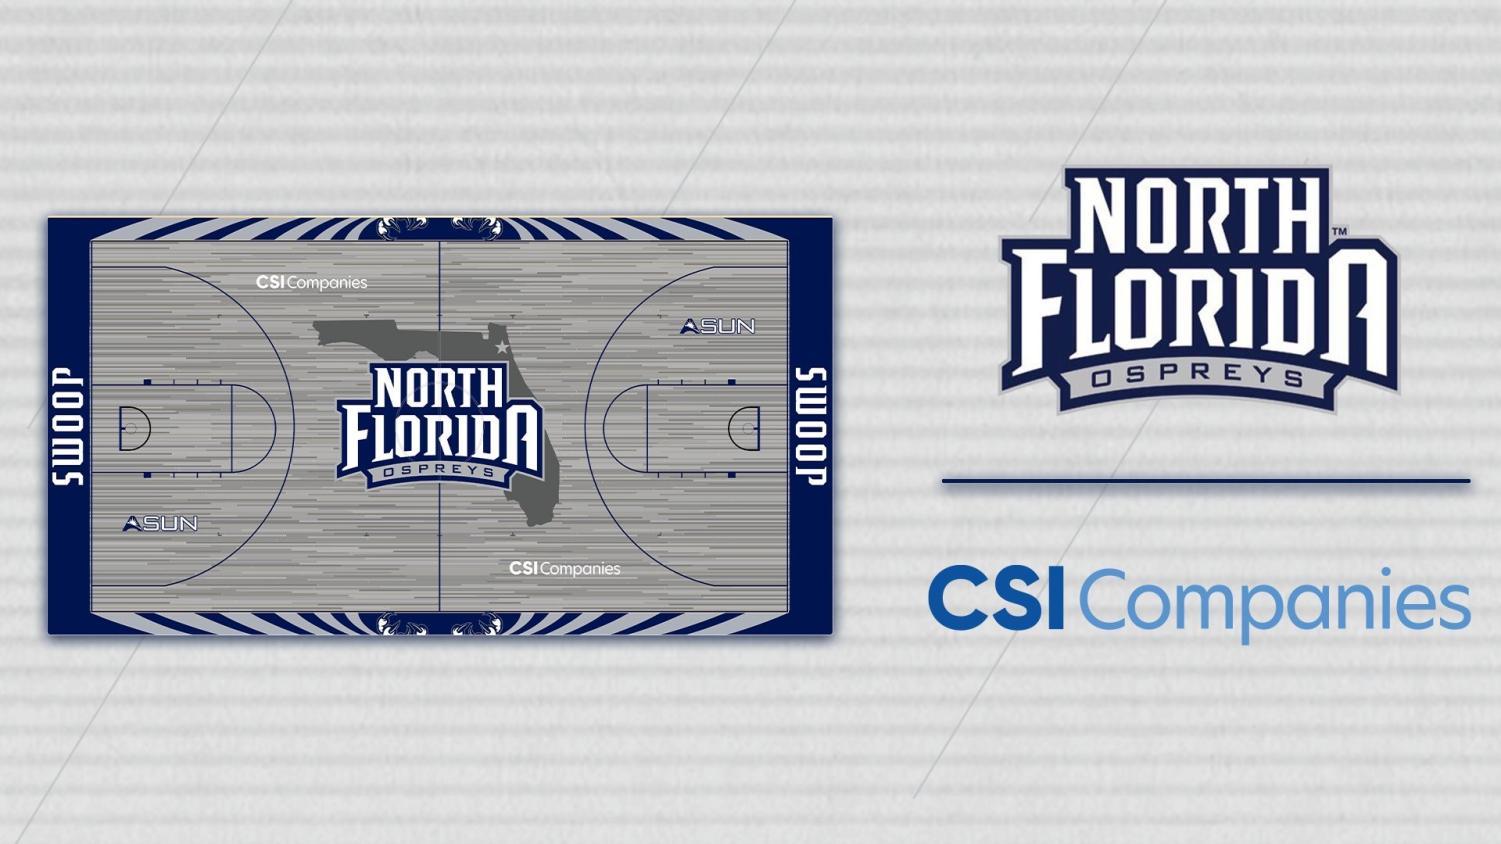 New court design featuring a gray floor with navy border.